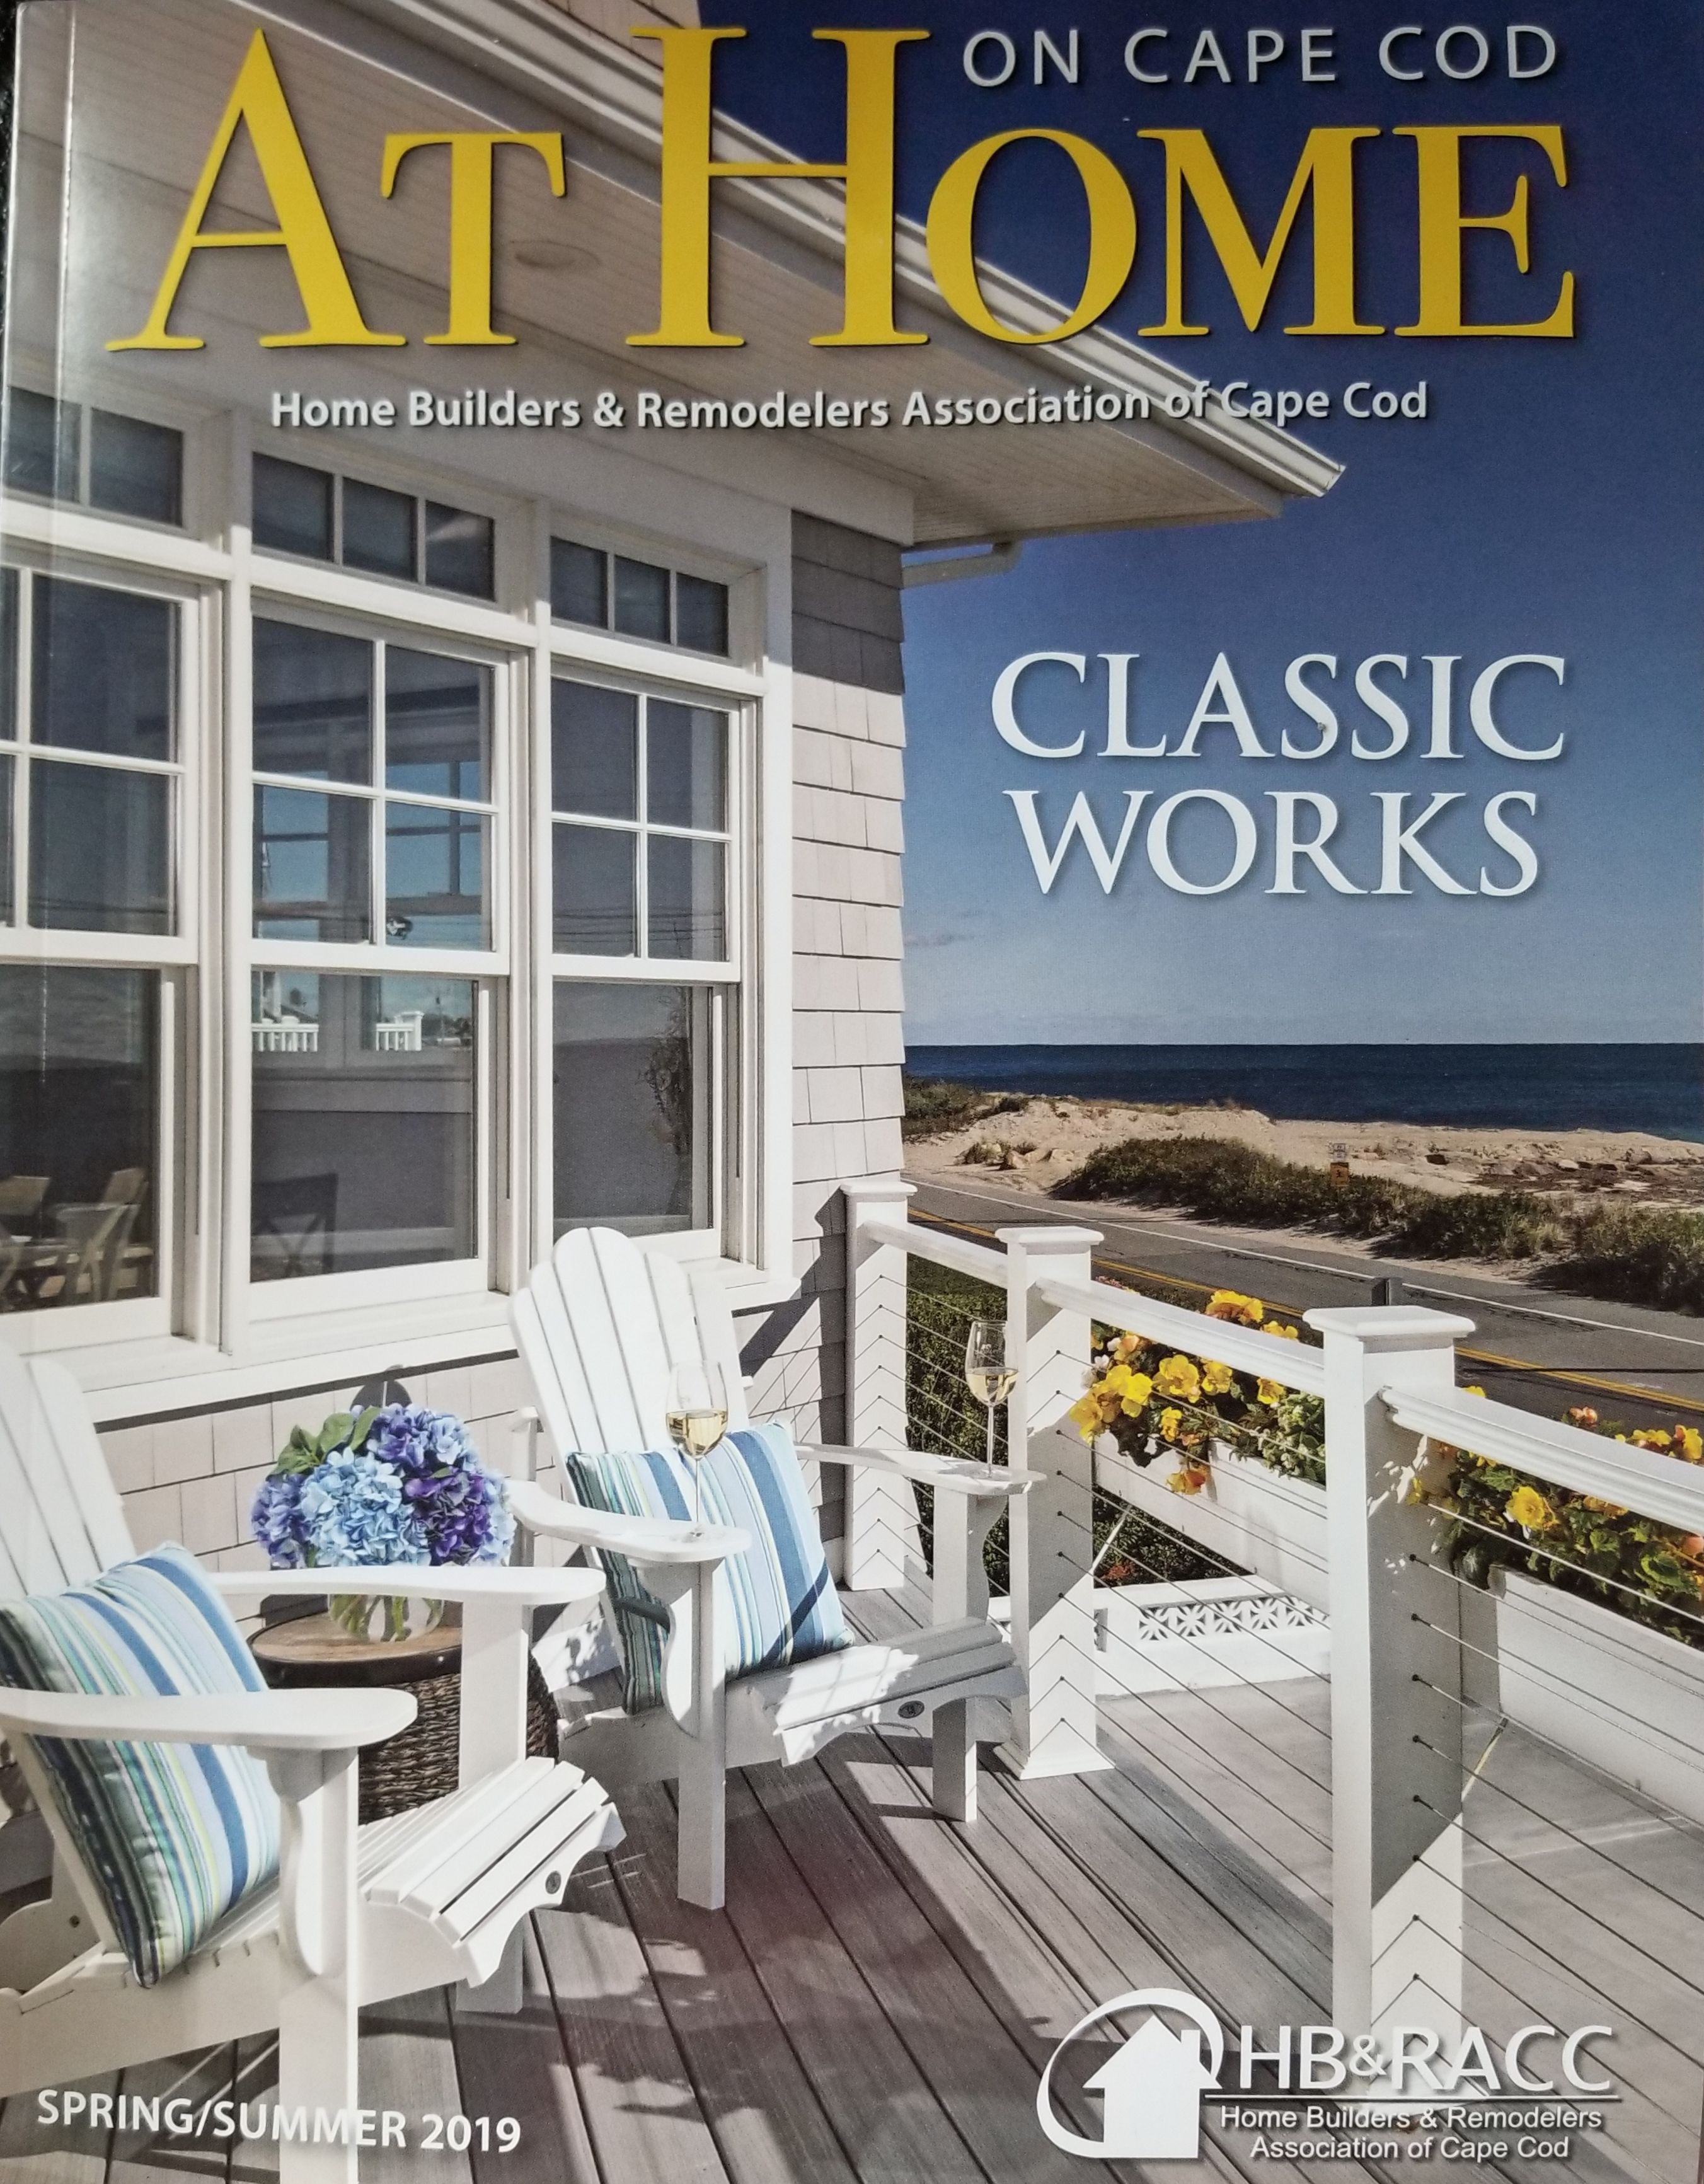 At Home cape cod cover spring summer 2019.jpg